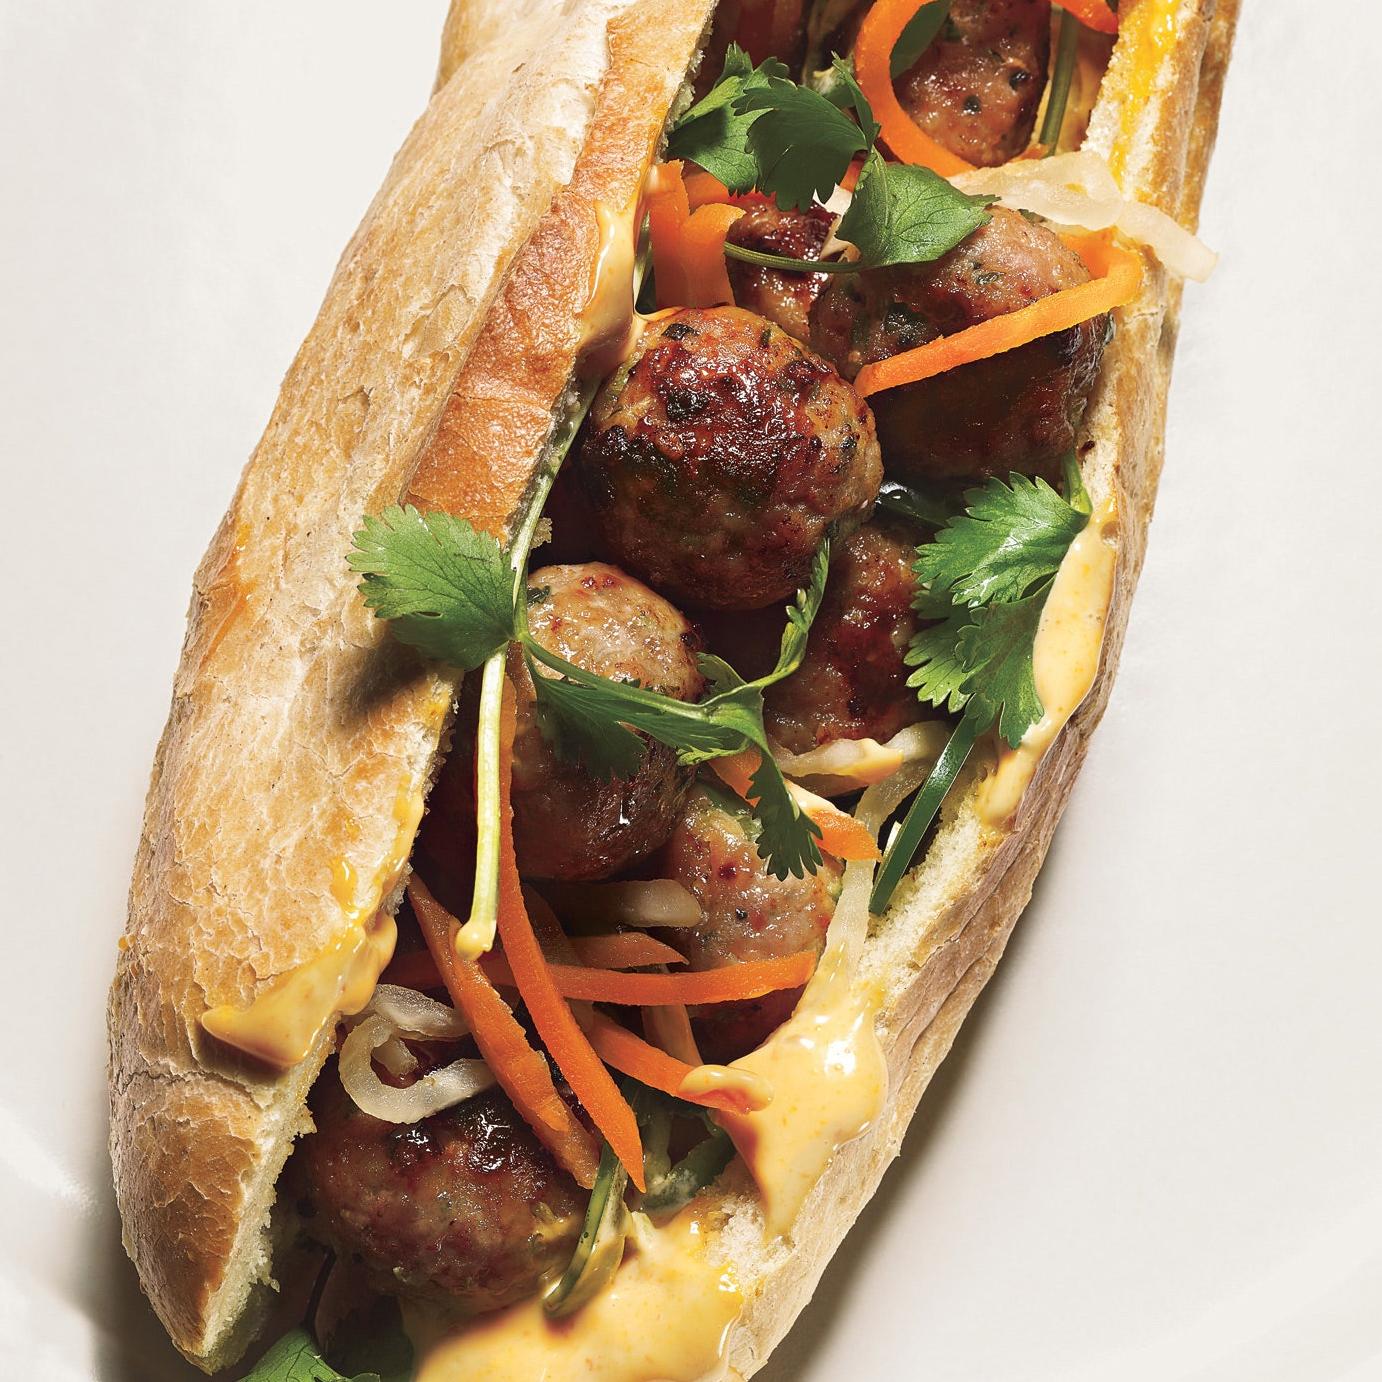  A burst of flavors in every bite of this Vietnamese Grilled Pork Meatball Sandwich.